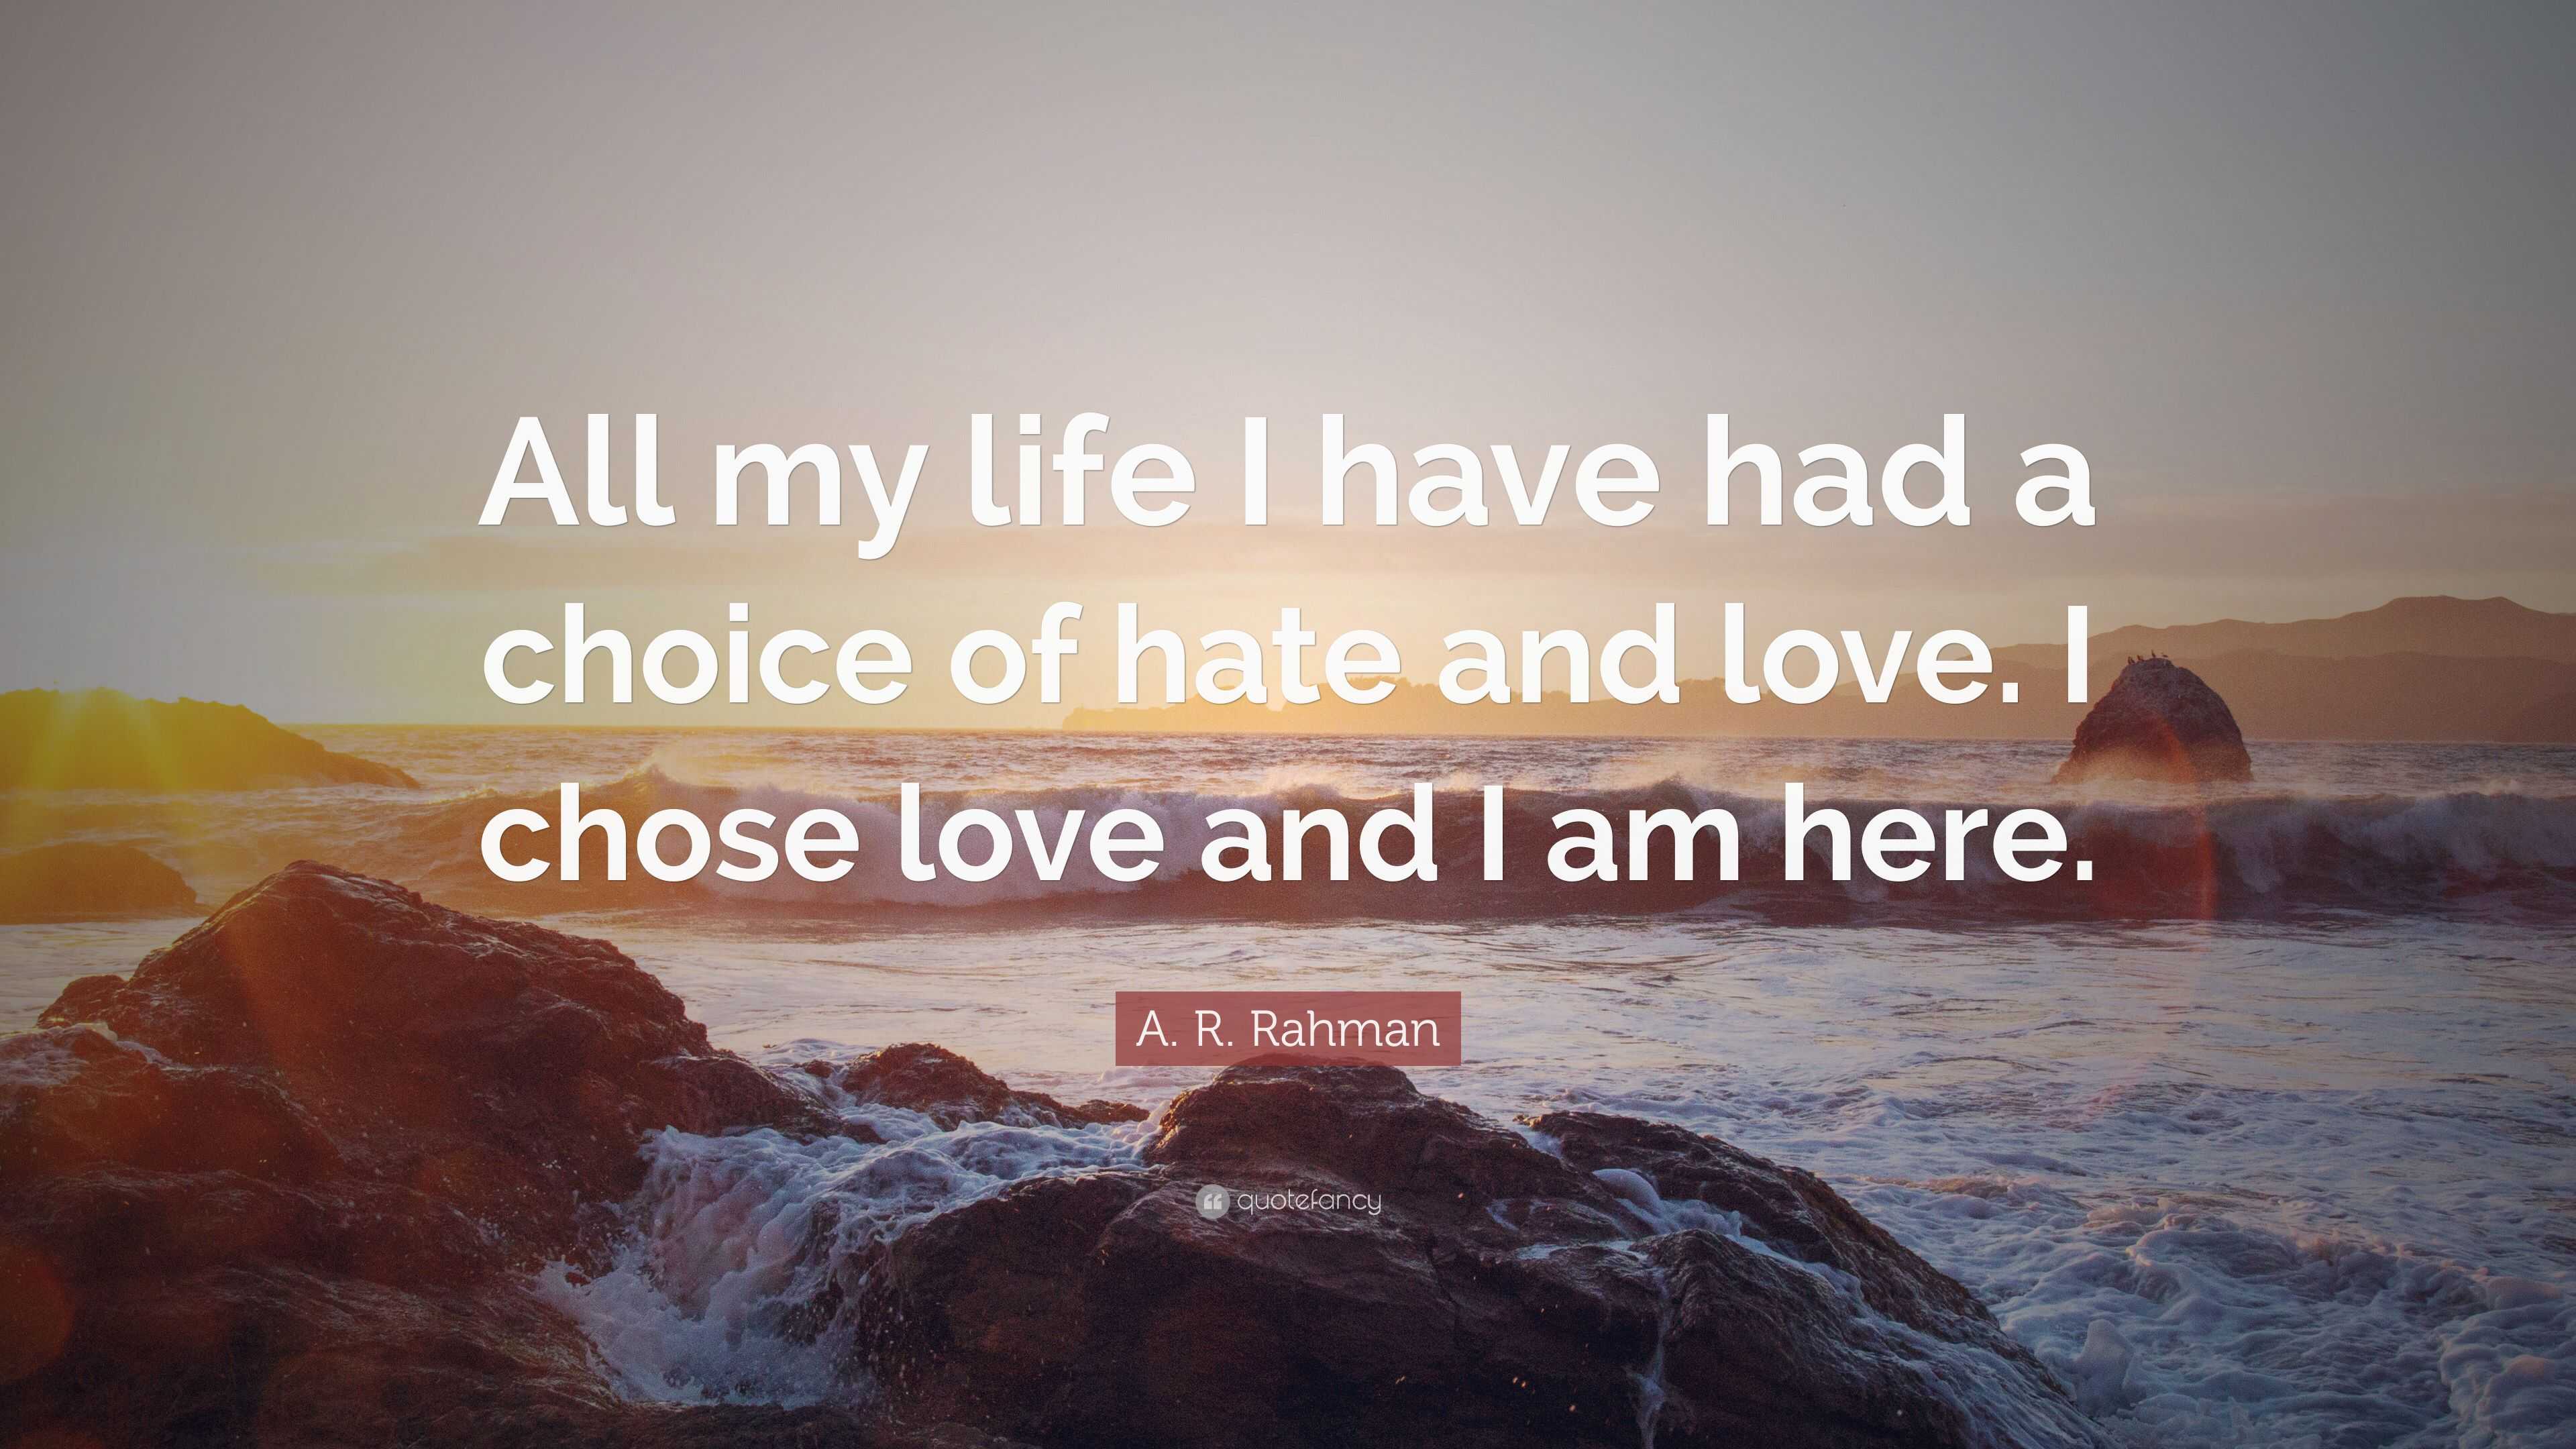 A R Rahman Quote “All my life I have had a choice of hate and